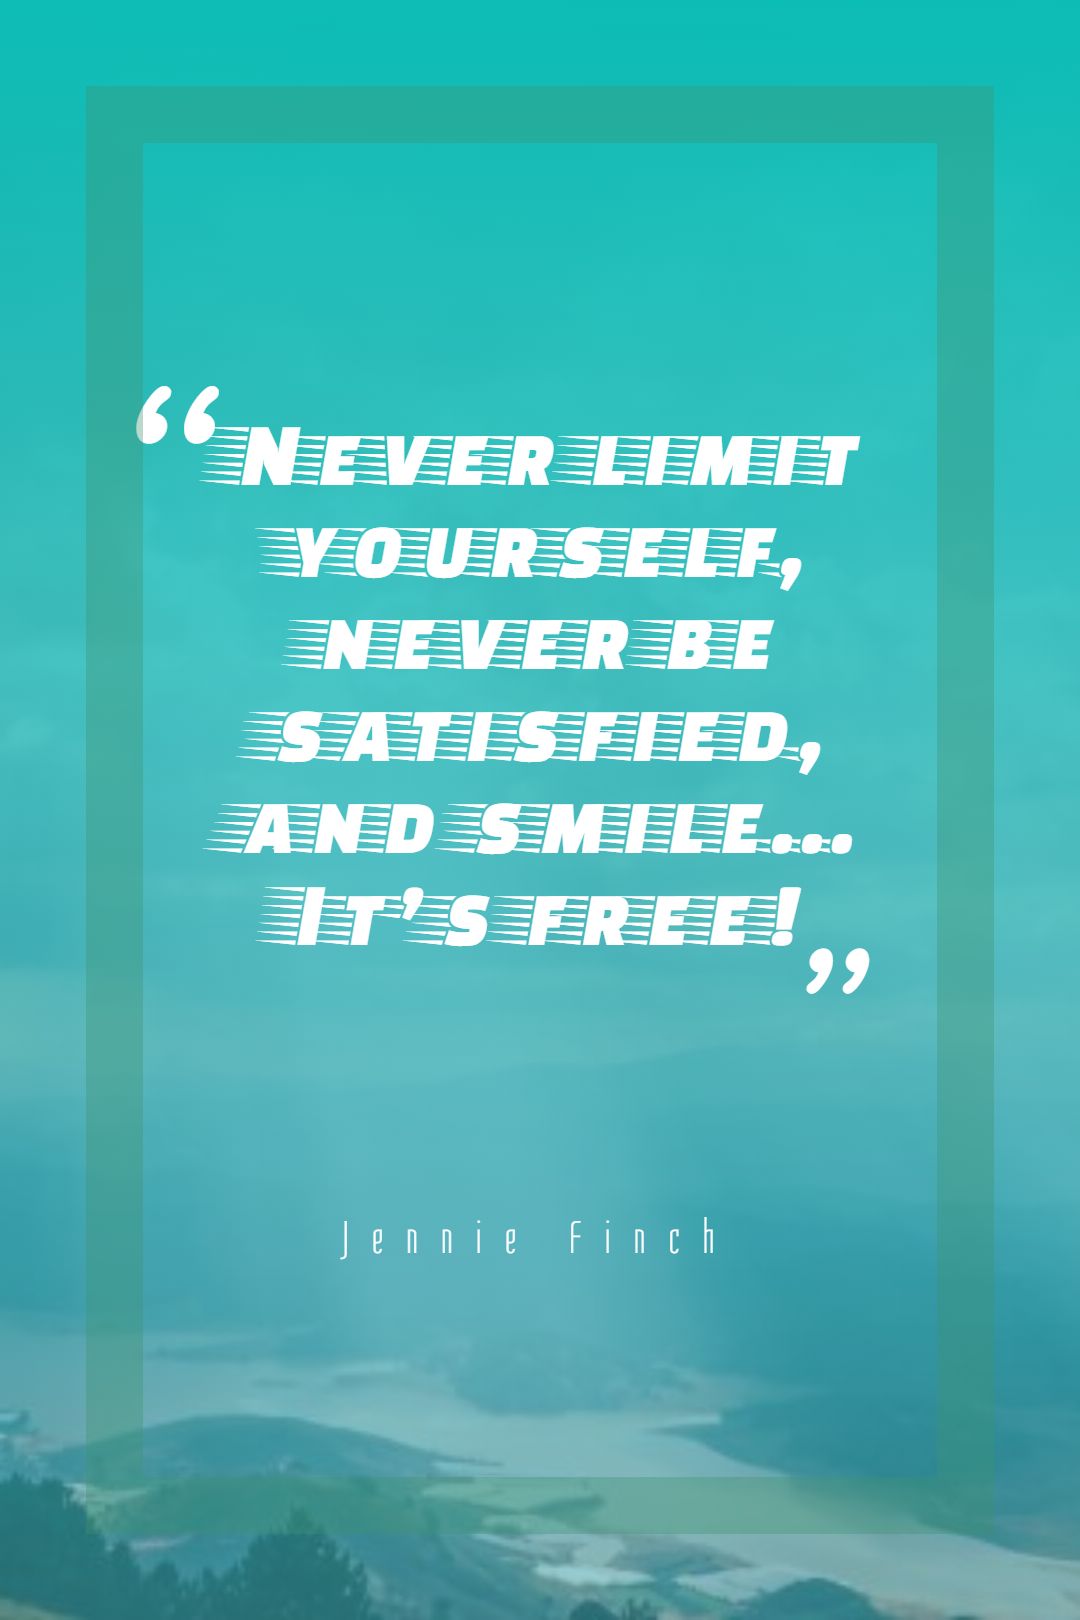 Never limit yourself never be satisfied and smile… It’s free